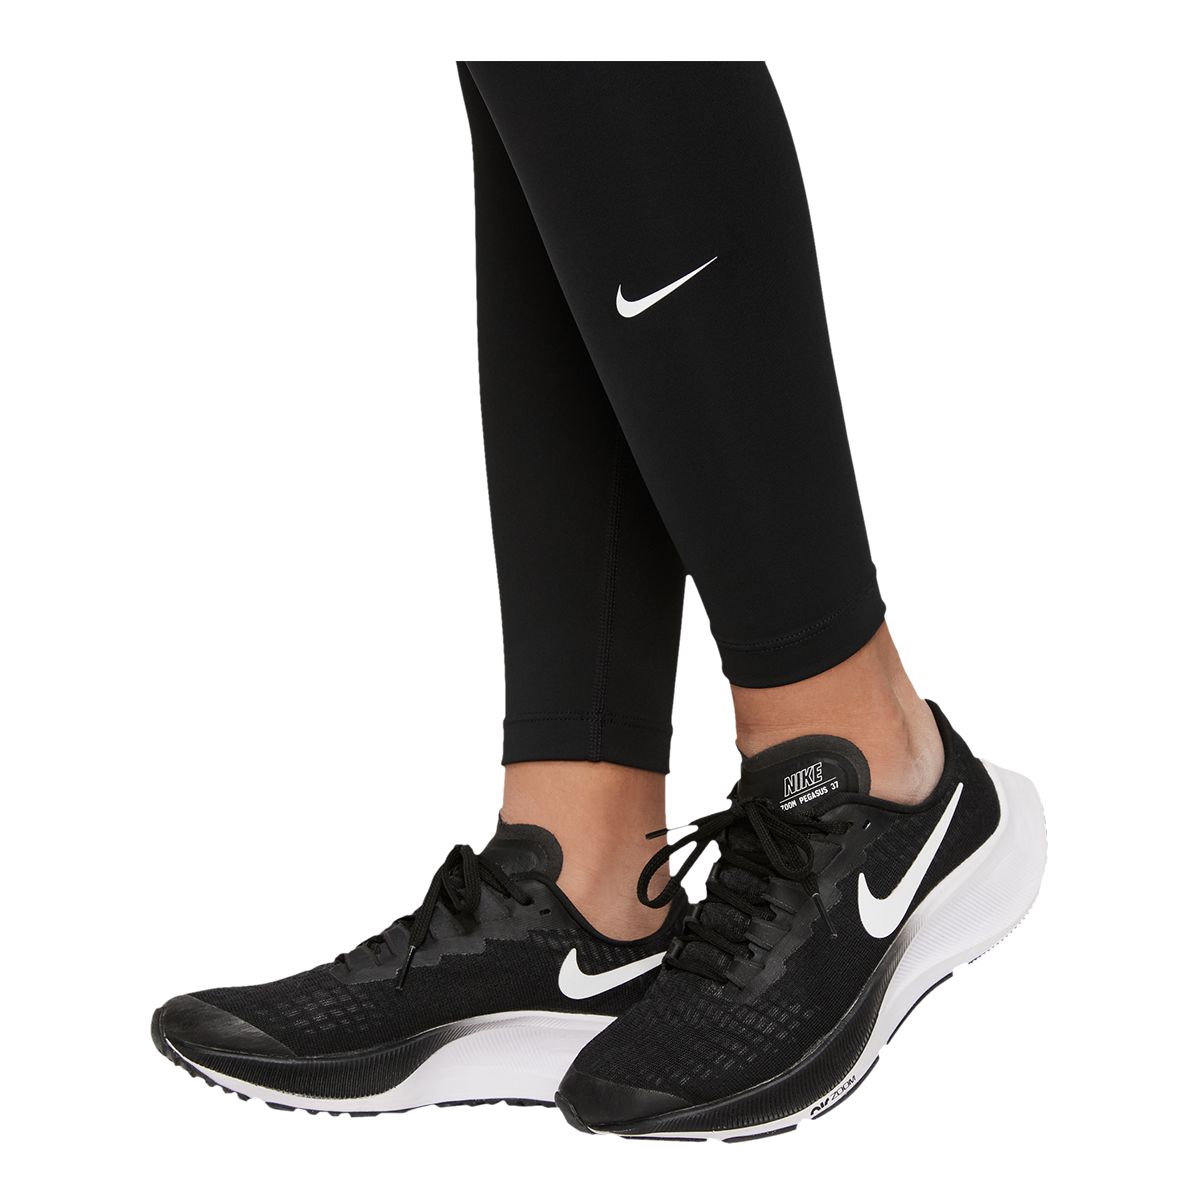 https://media-www.sportchek.ca/product/div-03-softgoods/dpt-72-casual-clothing/sdpt-04-girls/333827609/nike-df-one-tight-blk-blk-wht-q322--0d4d0ae6-e0f6-4035-ae0e-56ce4b956a4a-jpgrendition.jpg?imdensity=1&imwidth=1244&impolicy=mZoom